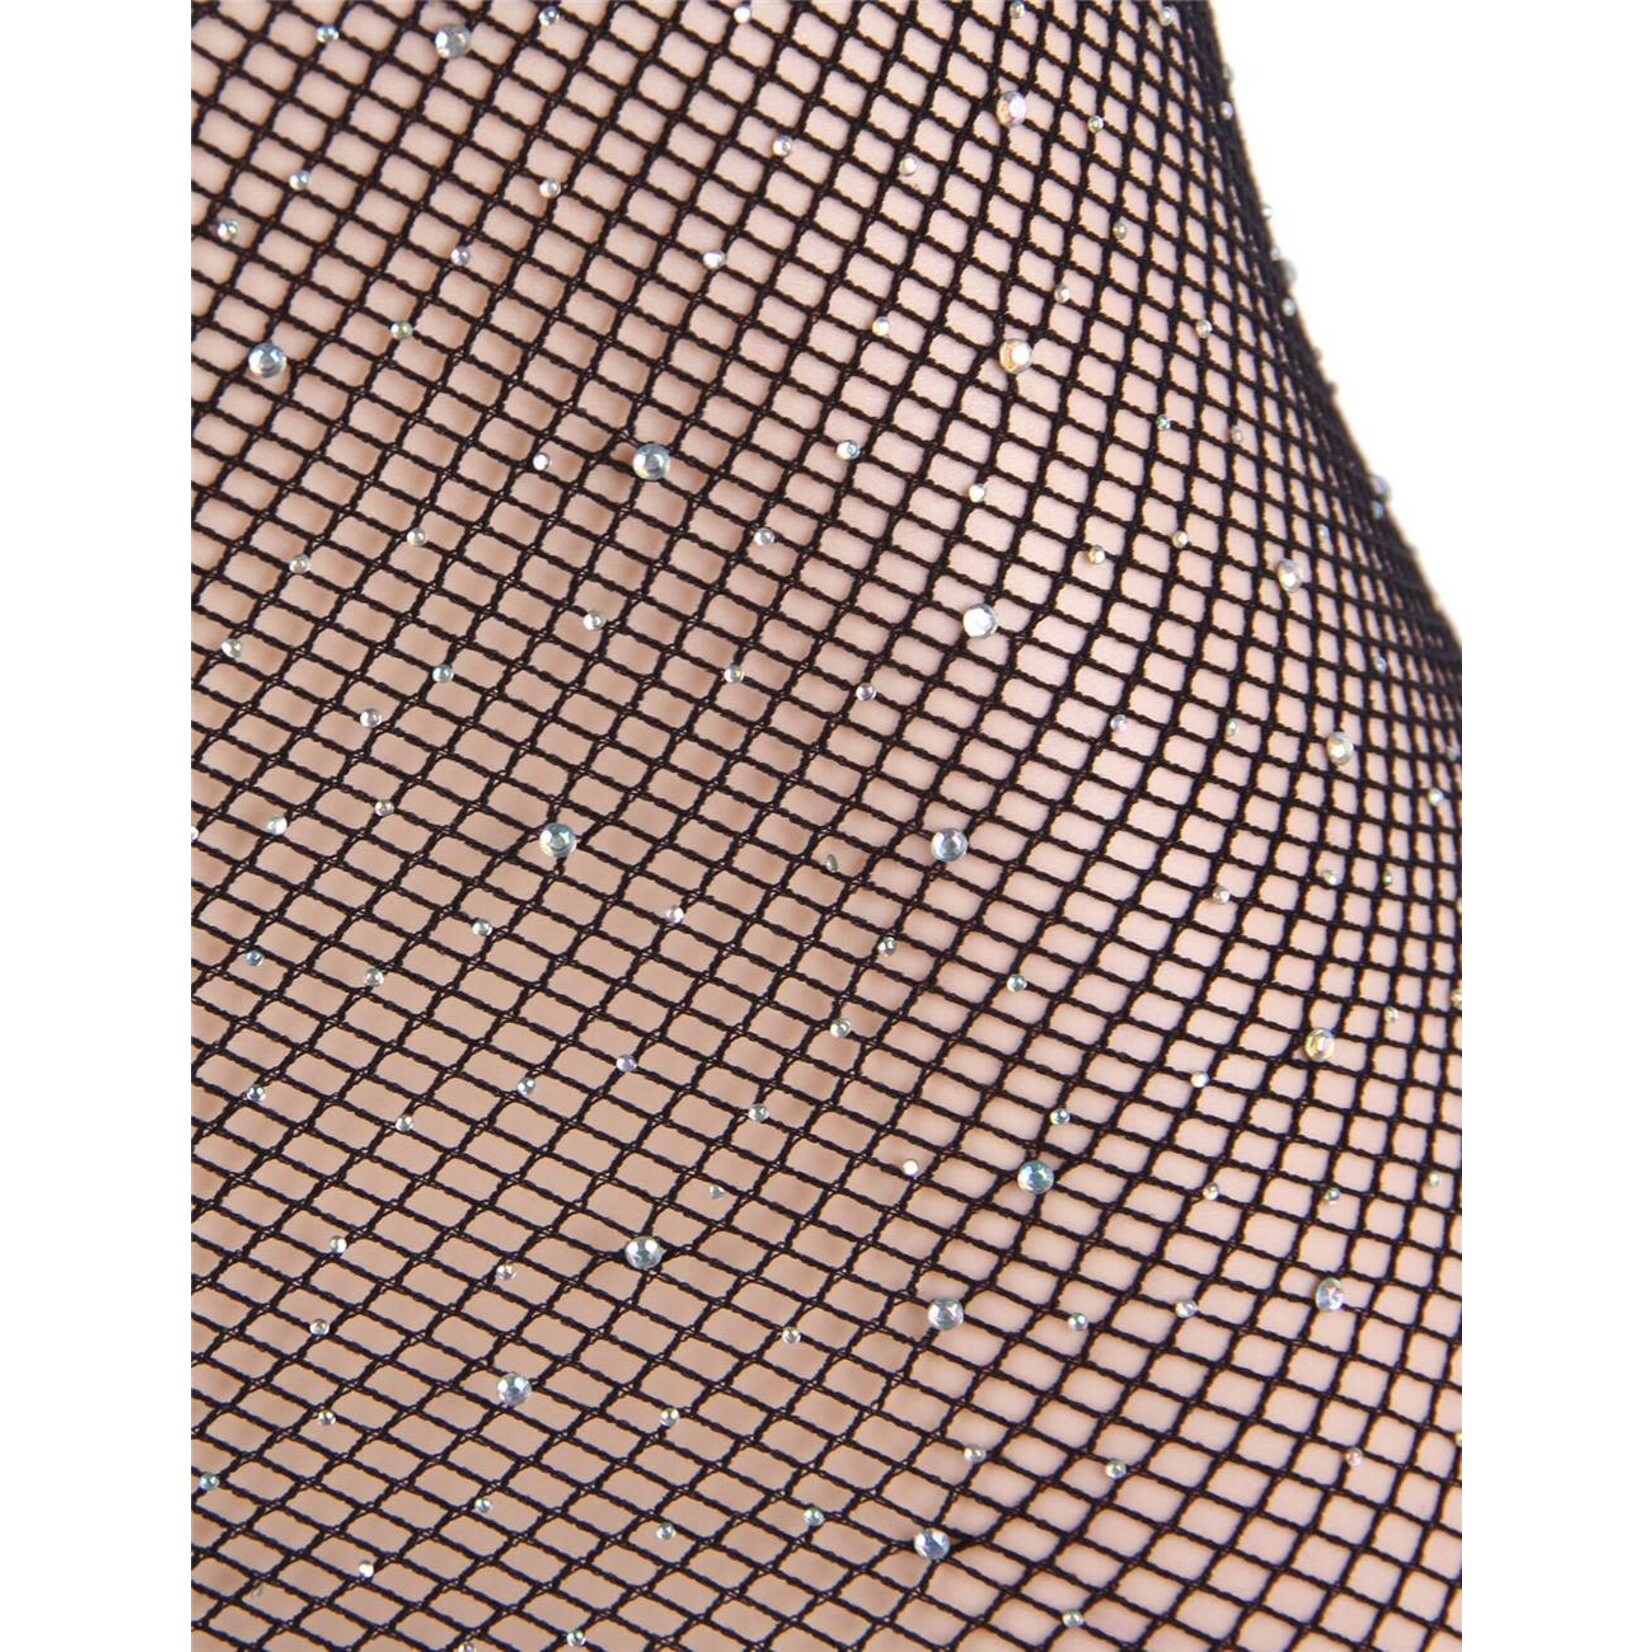 OH YEAH! -  BLACK FISHNET OFF-THE-SHOULDER SPARKLE BODYSTOCKING XS-M